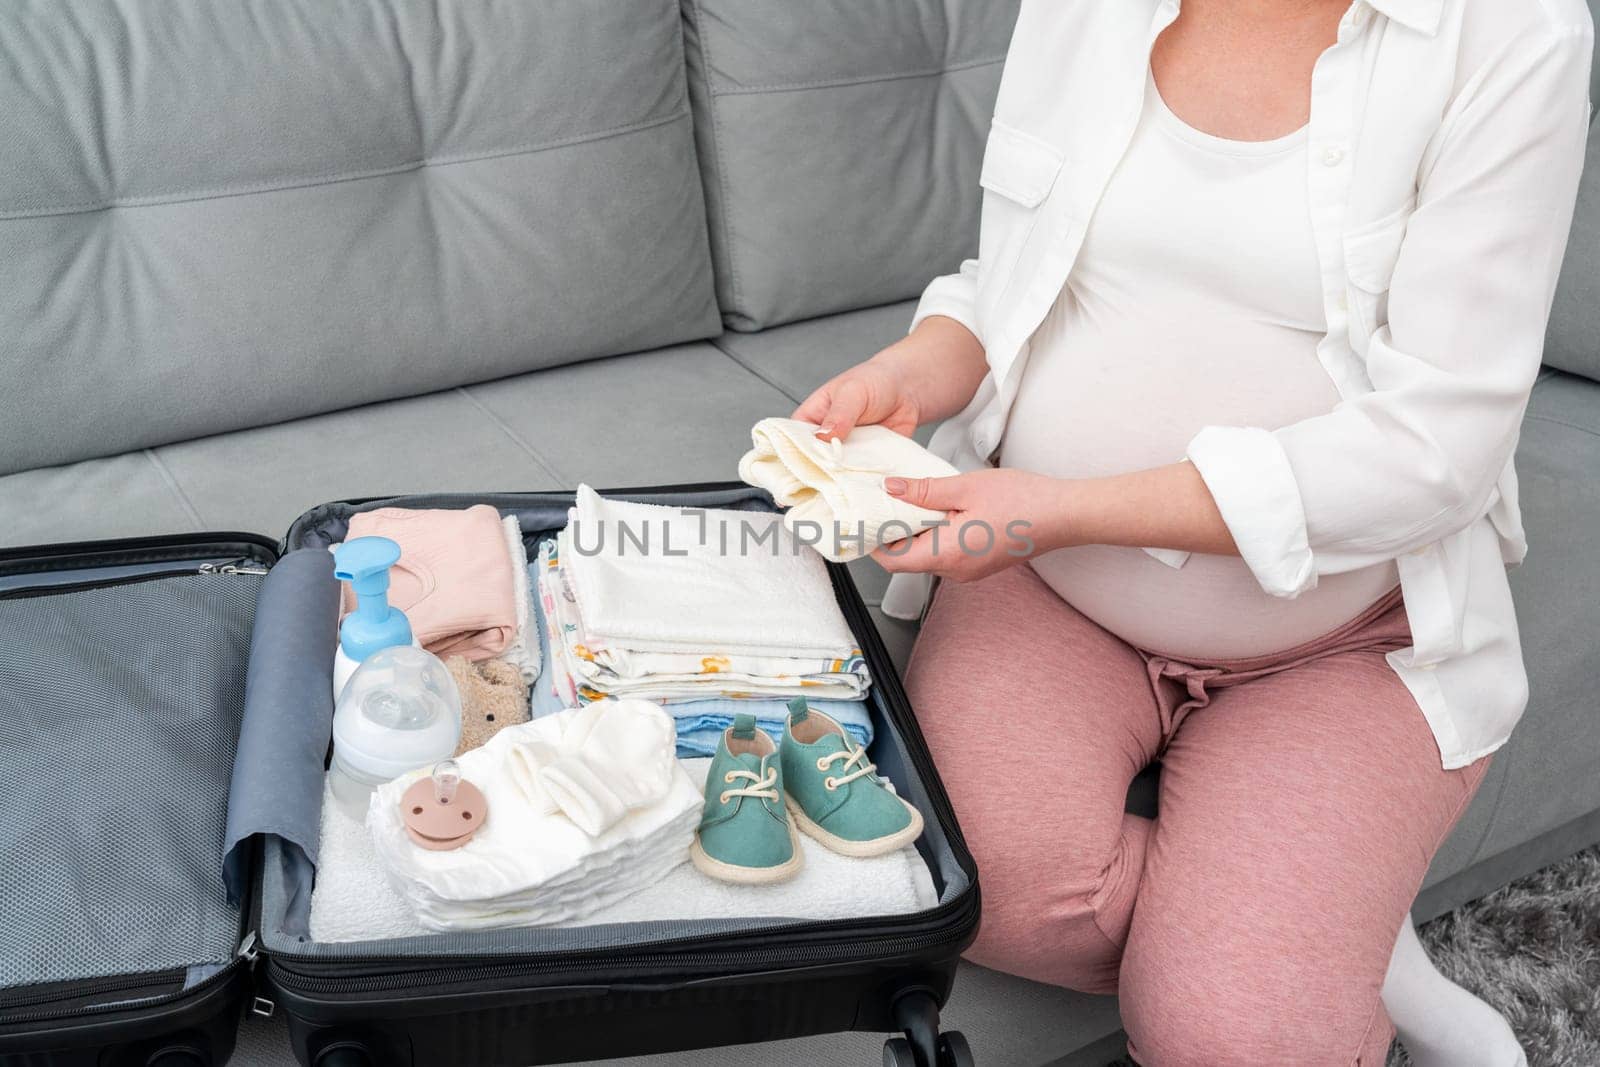 Things for the maternity hospital are packed by a pregnant woman.